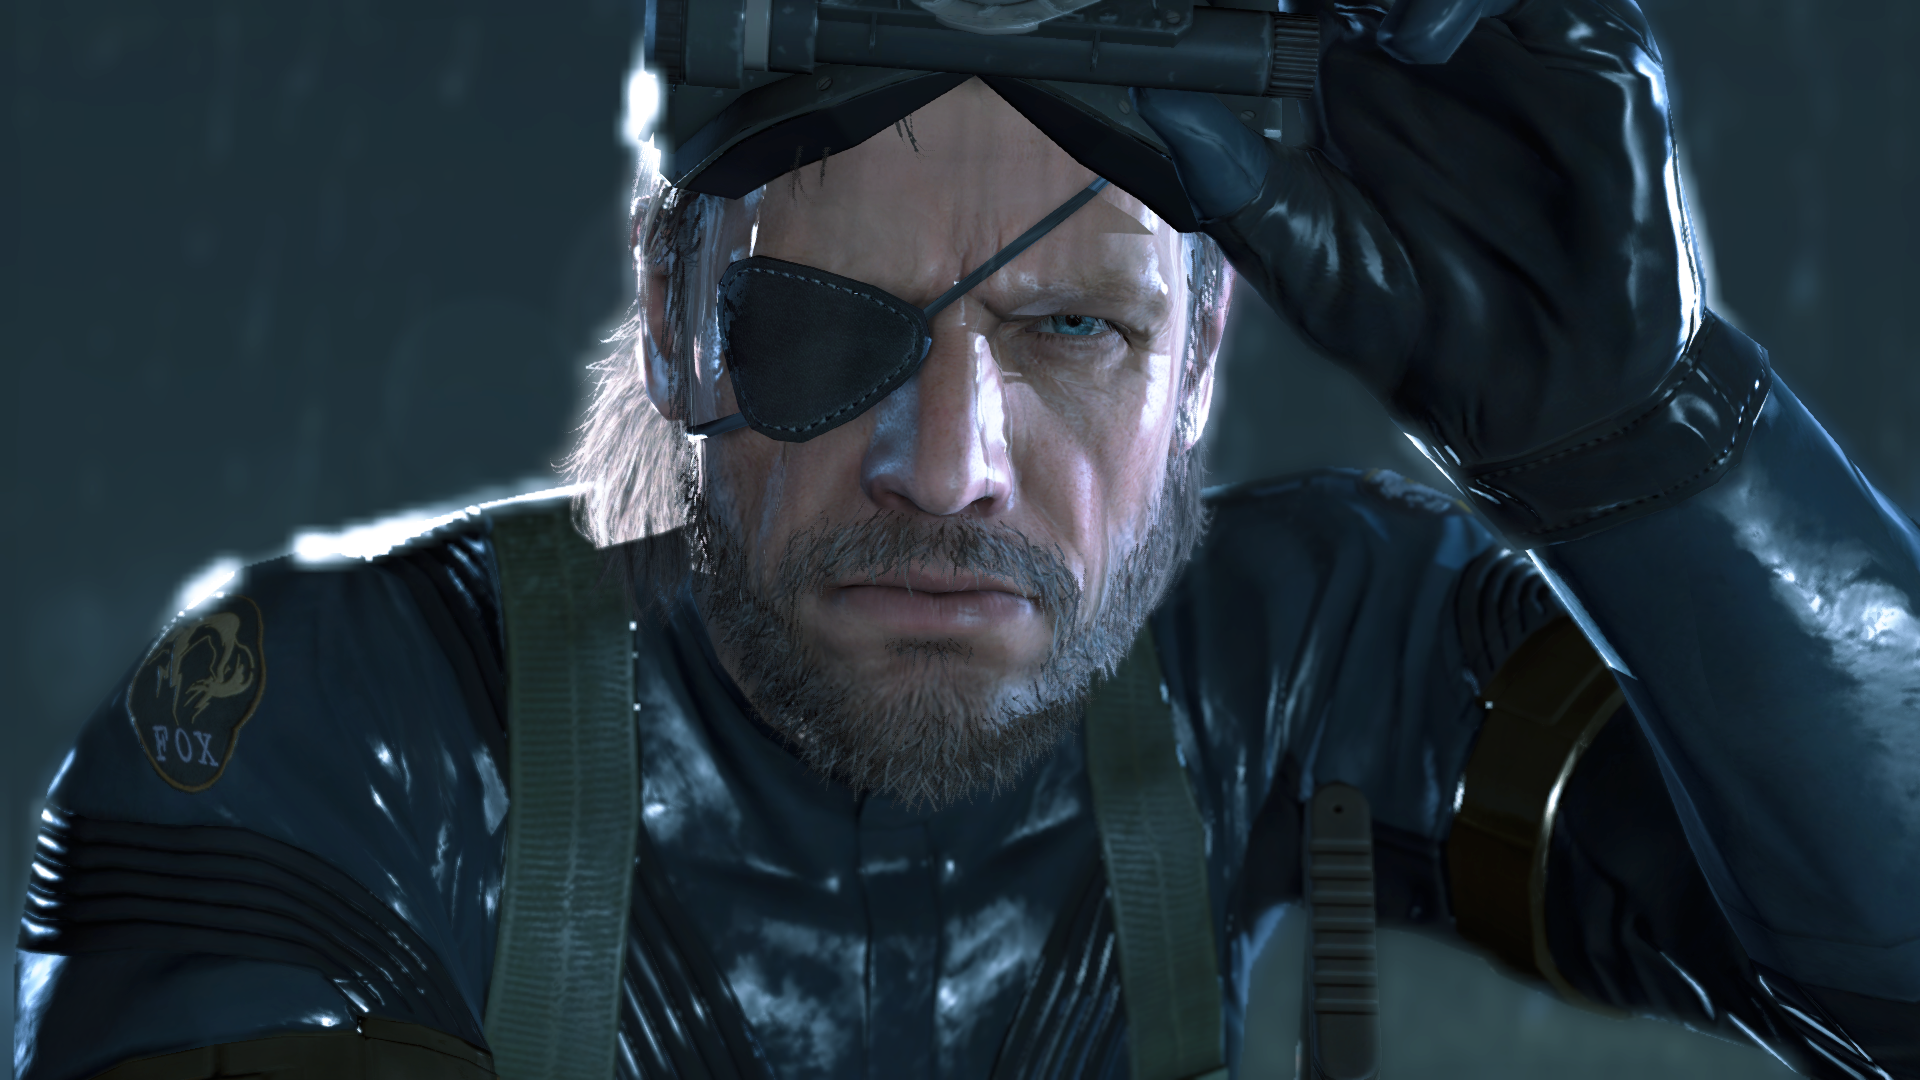 The Alien's In, Metal Gear's Out, and More of the Latest Gaming